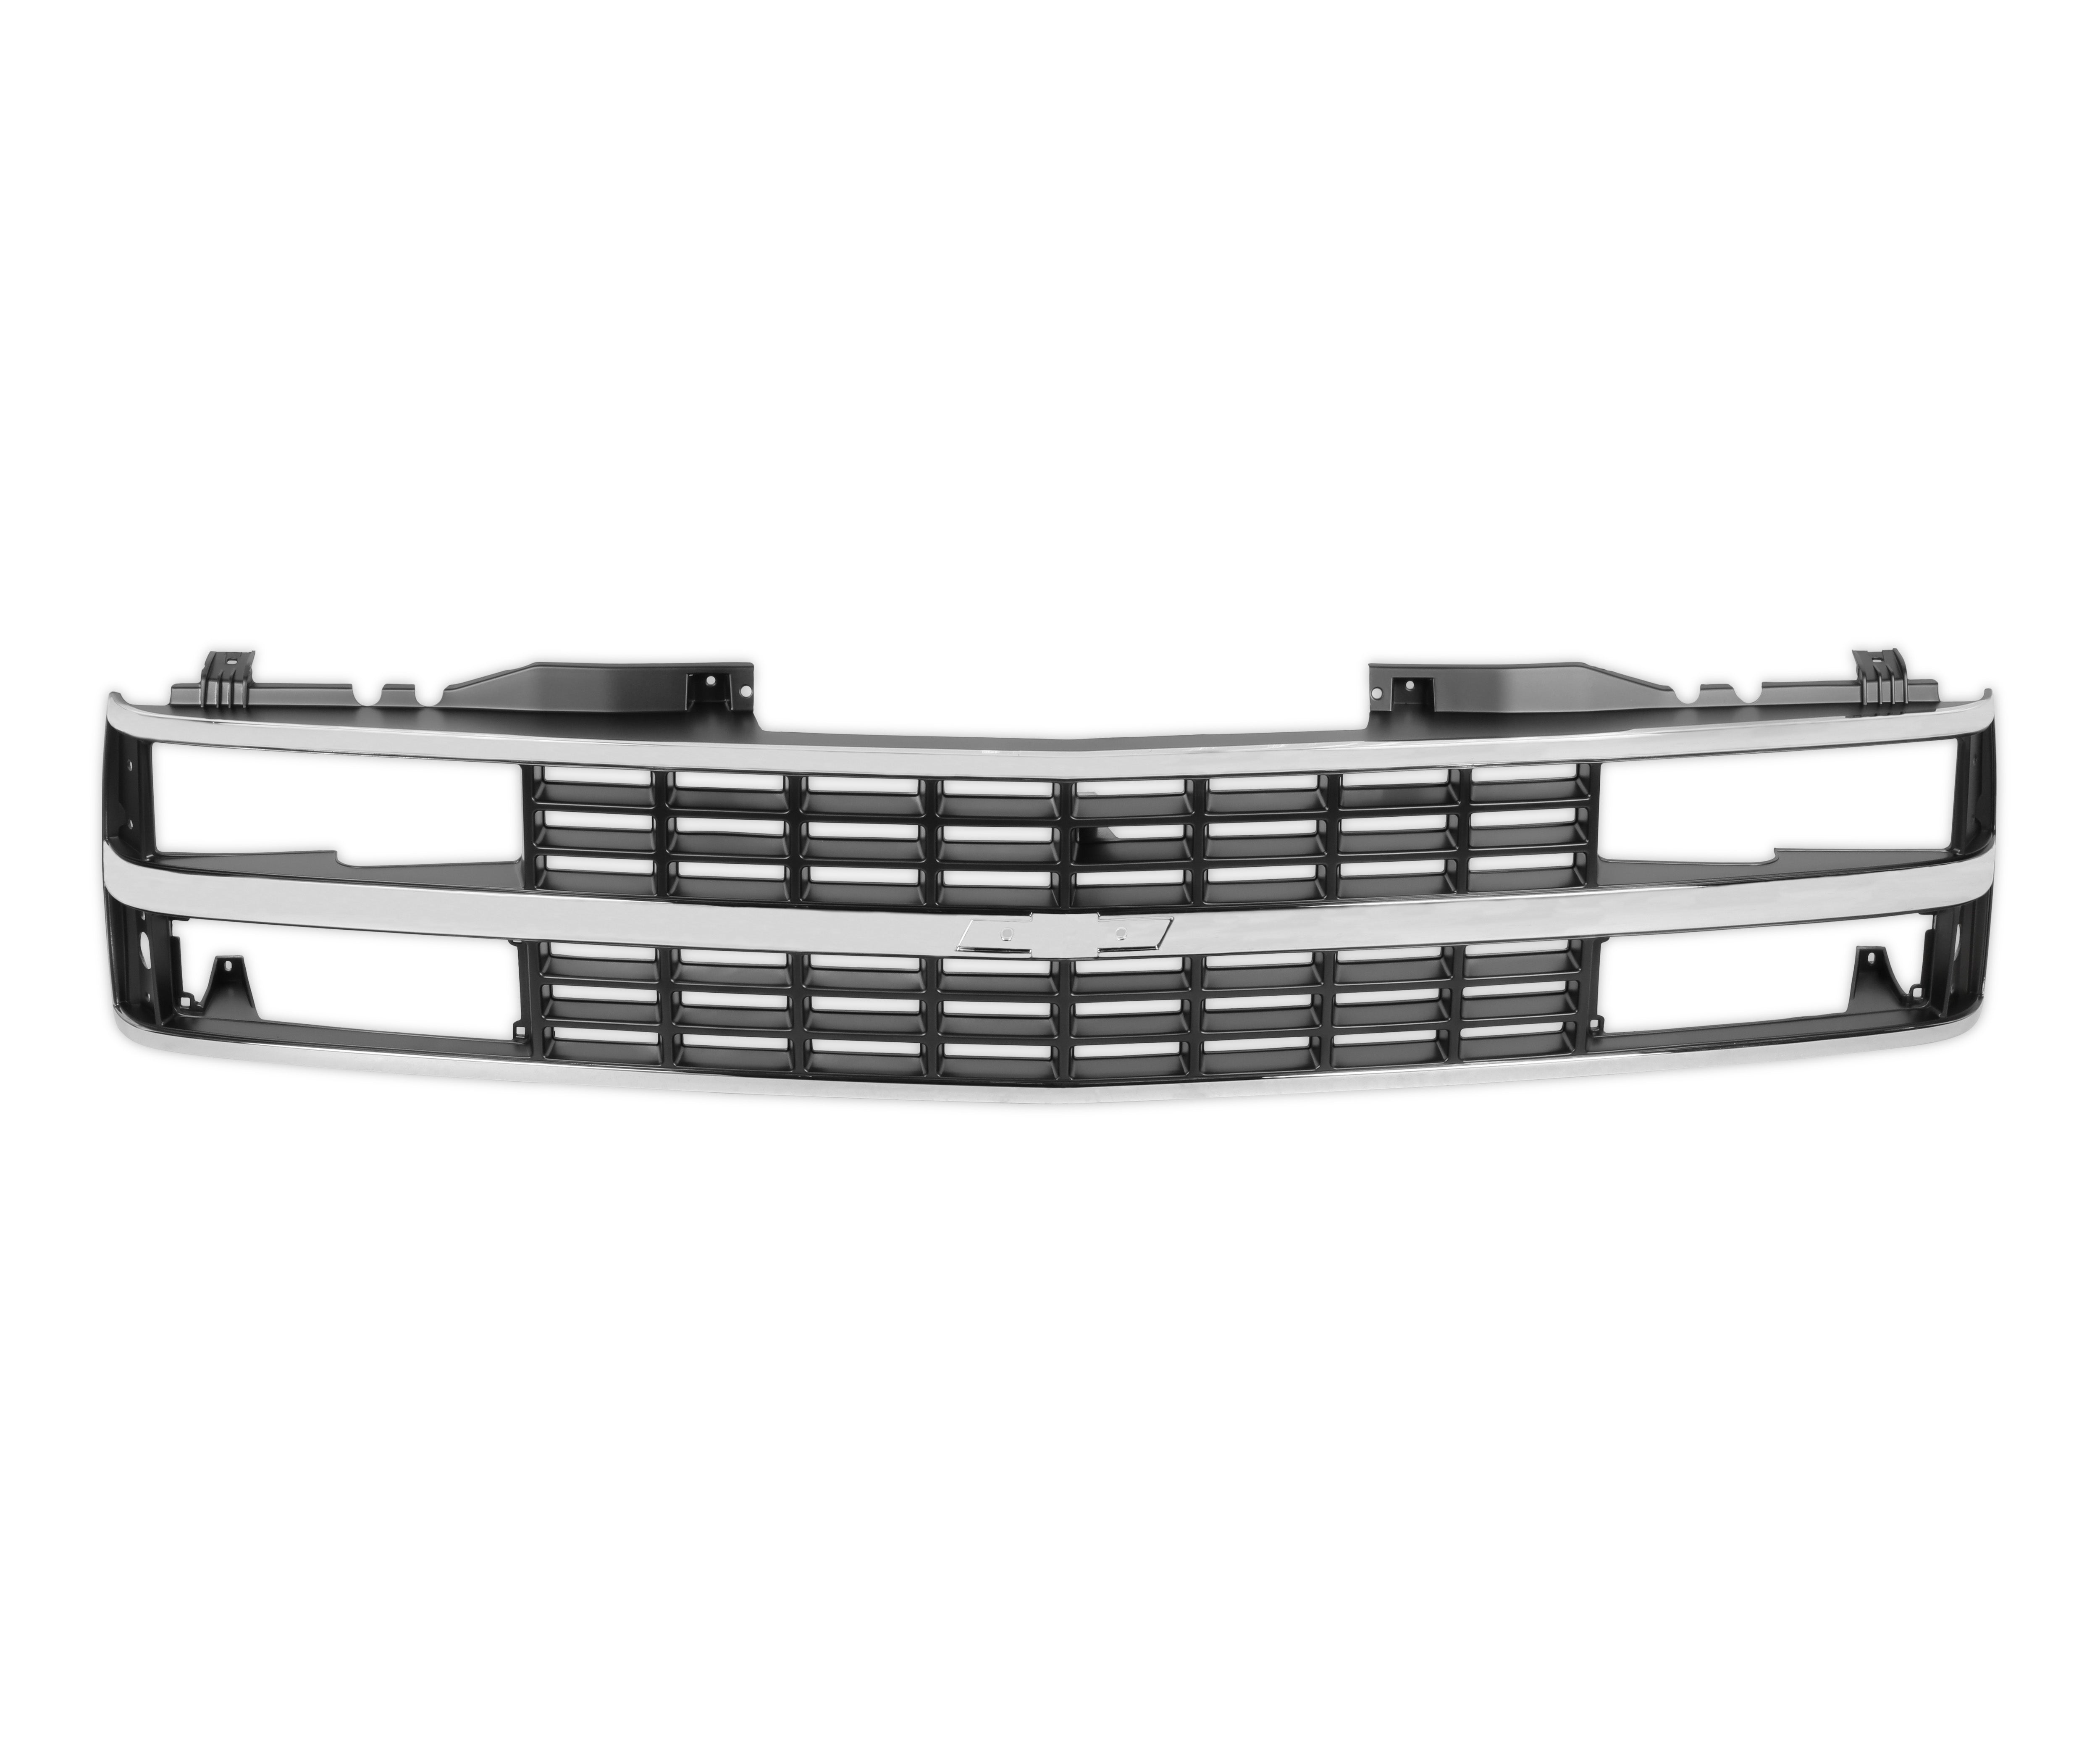 BROTHERS GMT400 Chevy Grille - Dual Headlight - Chrome pn 04-366